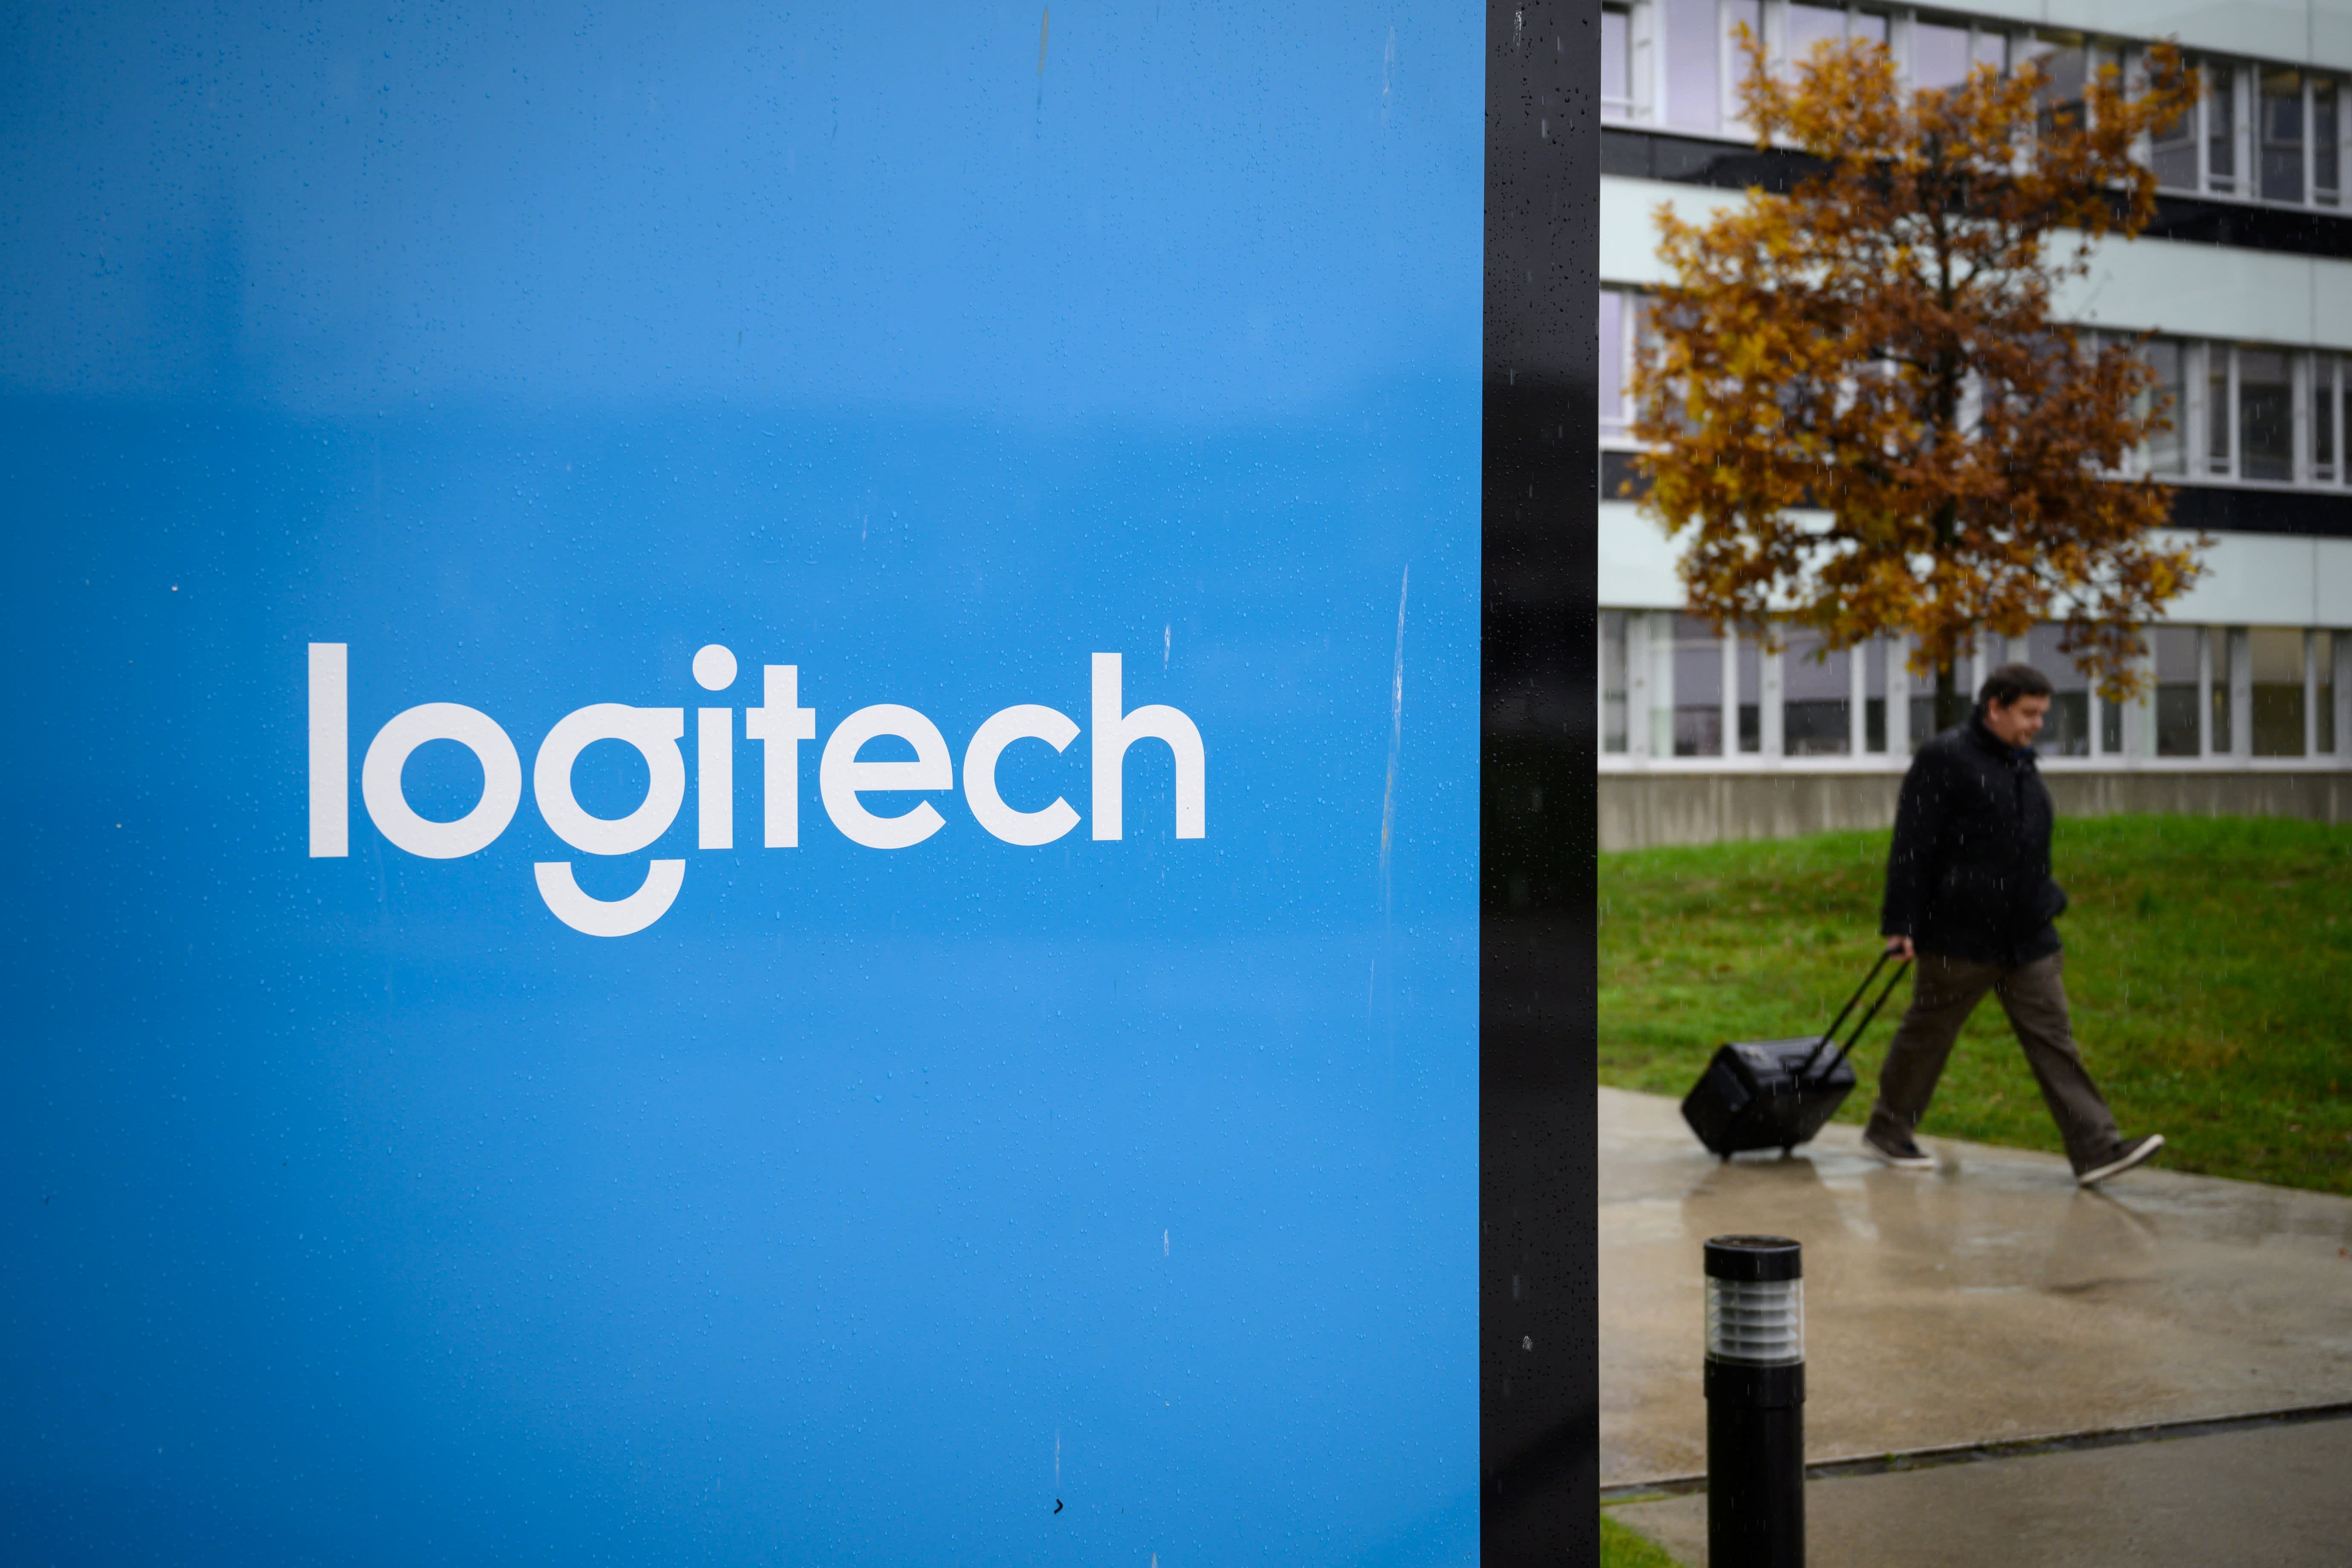 Credit Suisse downgrades Logitech, saying there's little hope for growth